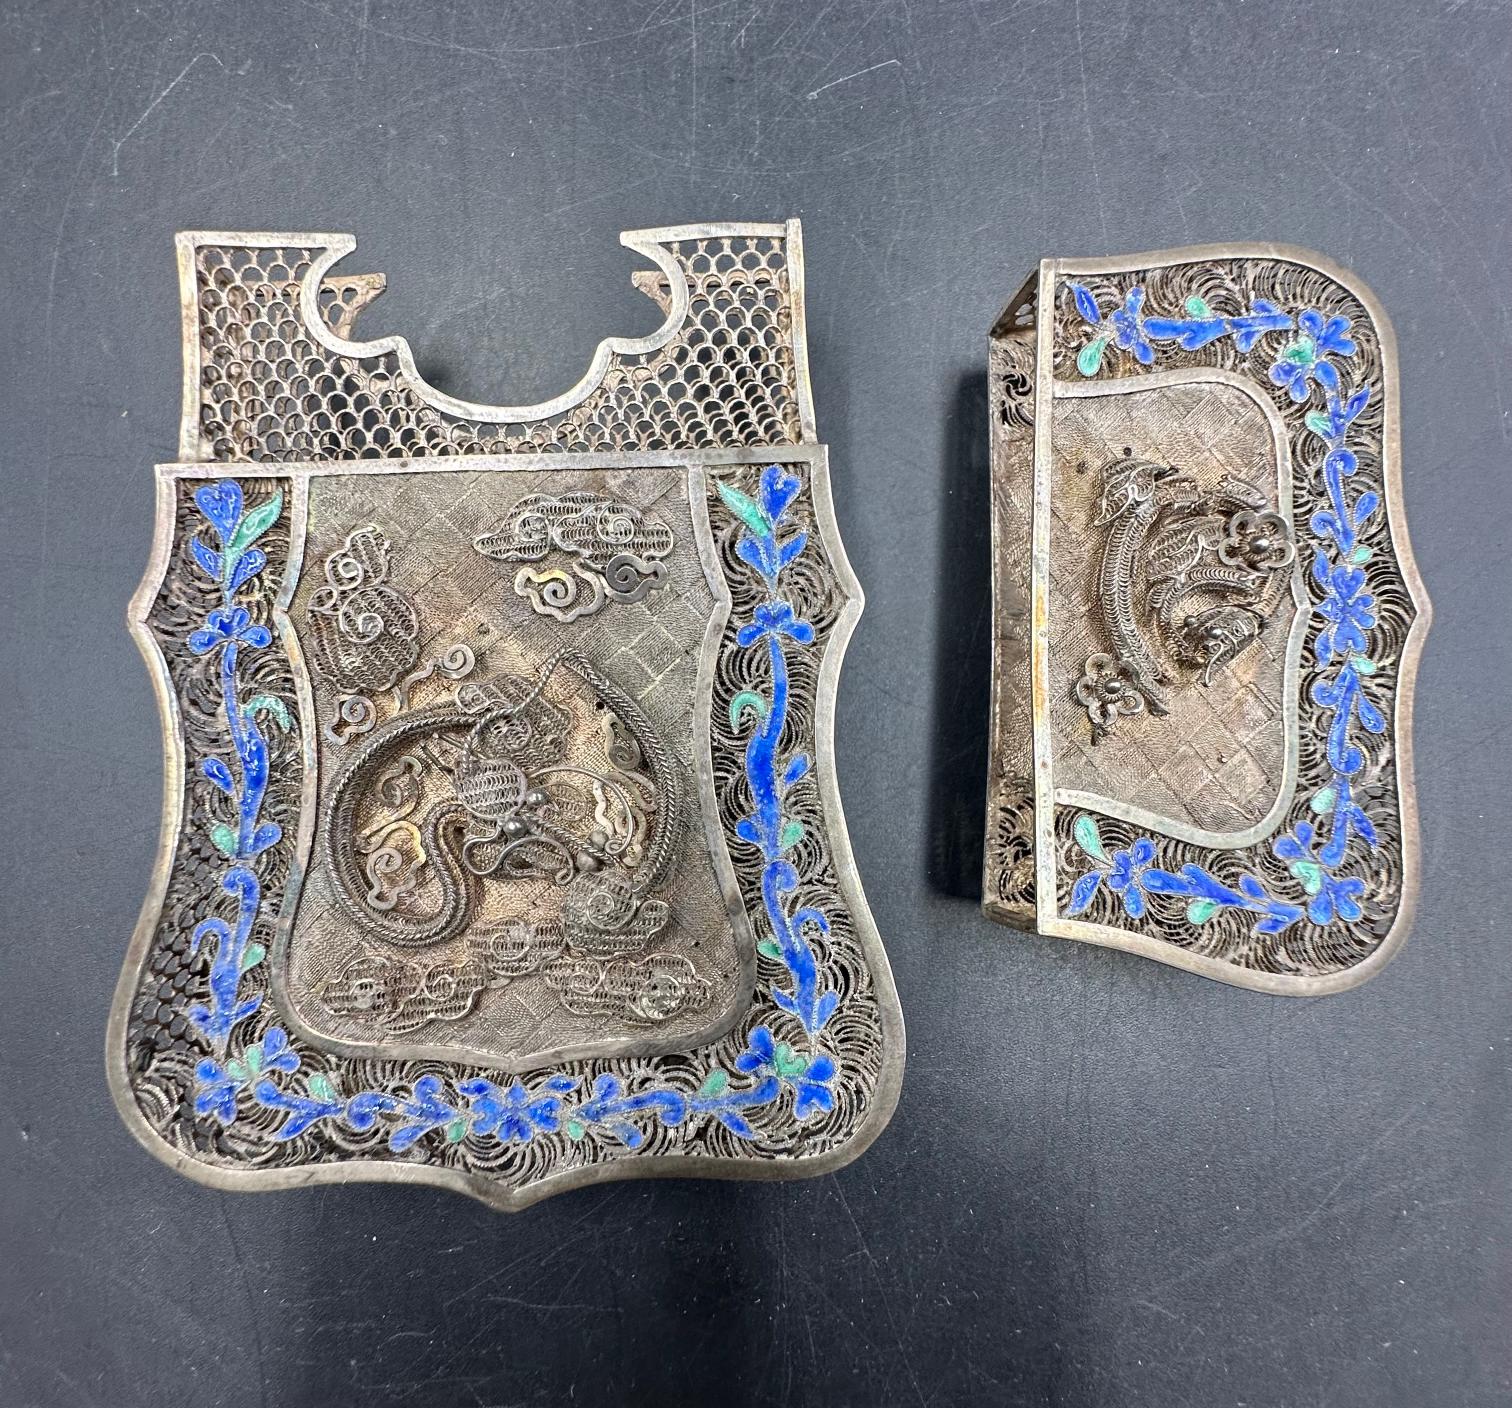 A 19th Century Chinese silver wirework card holder with serpentine edge and floral border